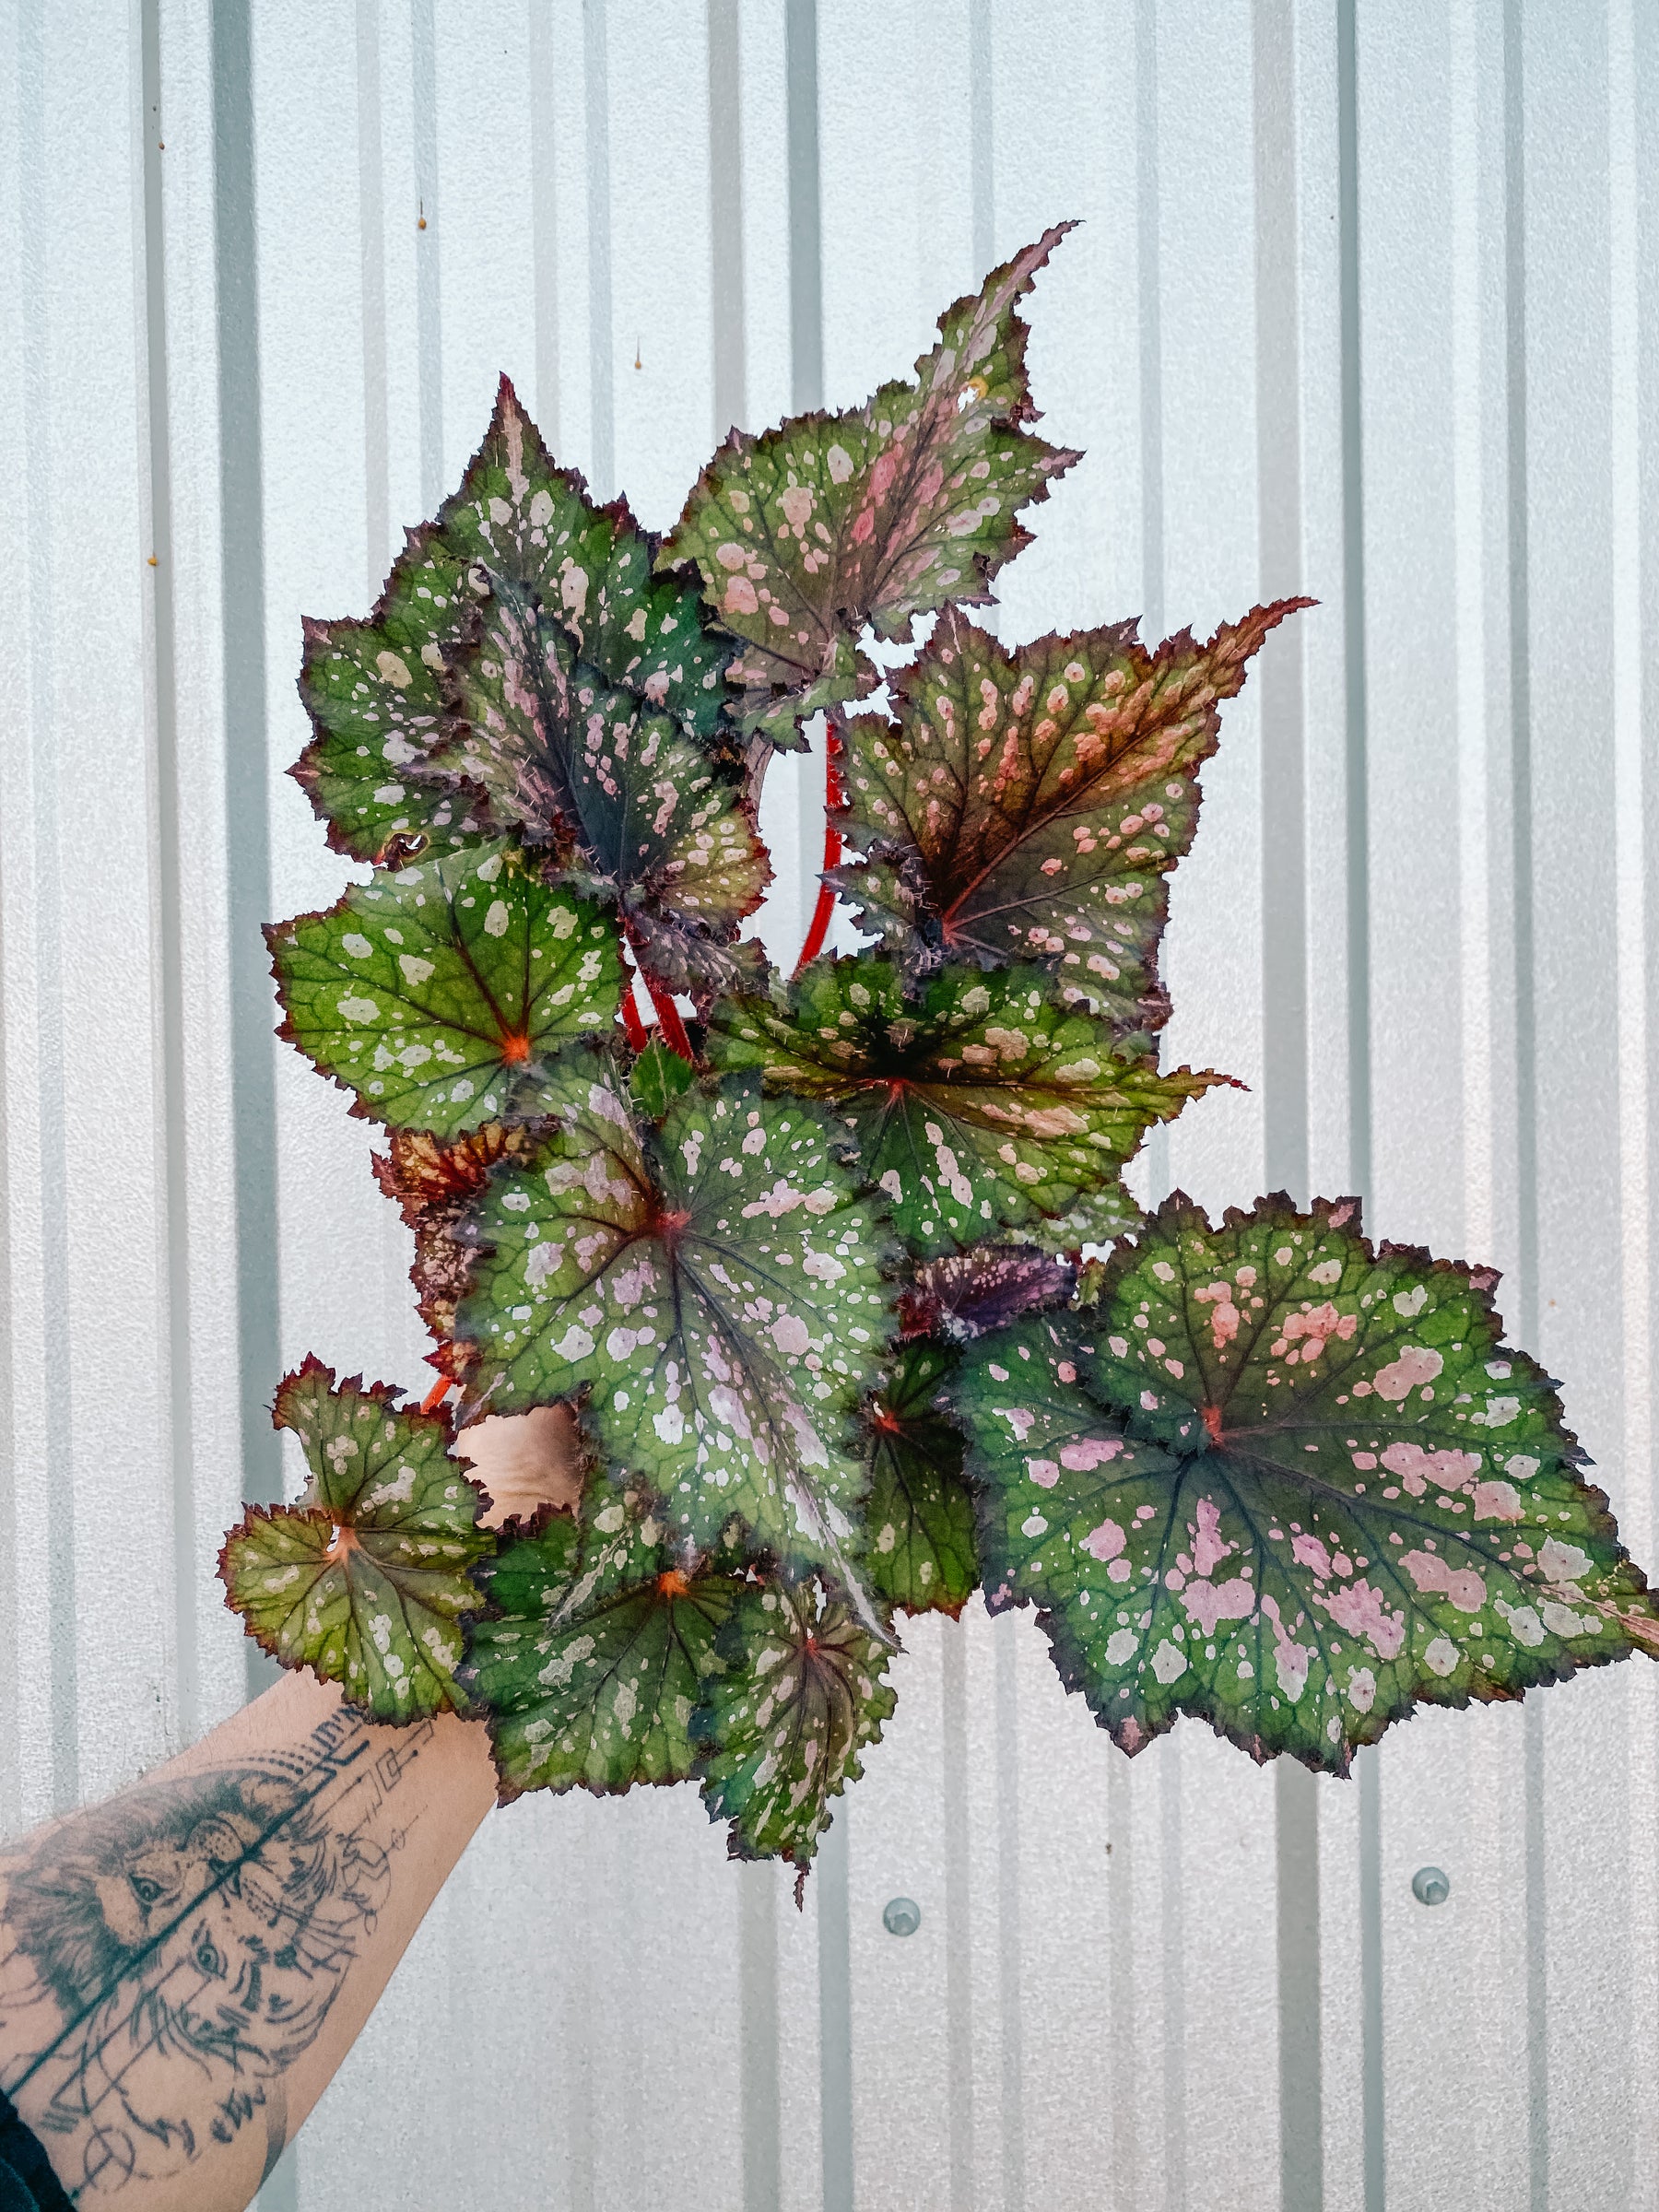 6" Begonia 'Michael's Unknown'